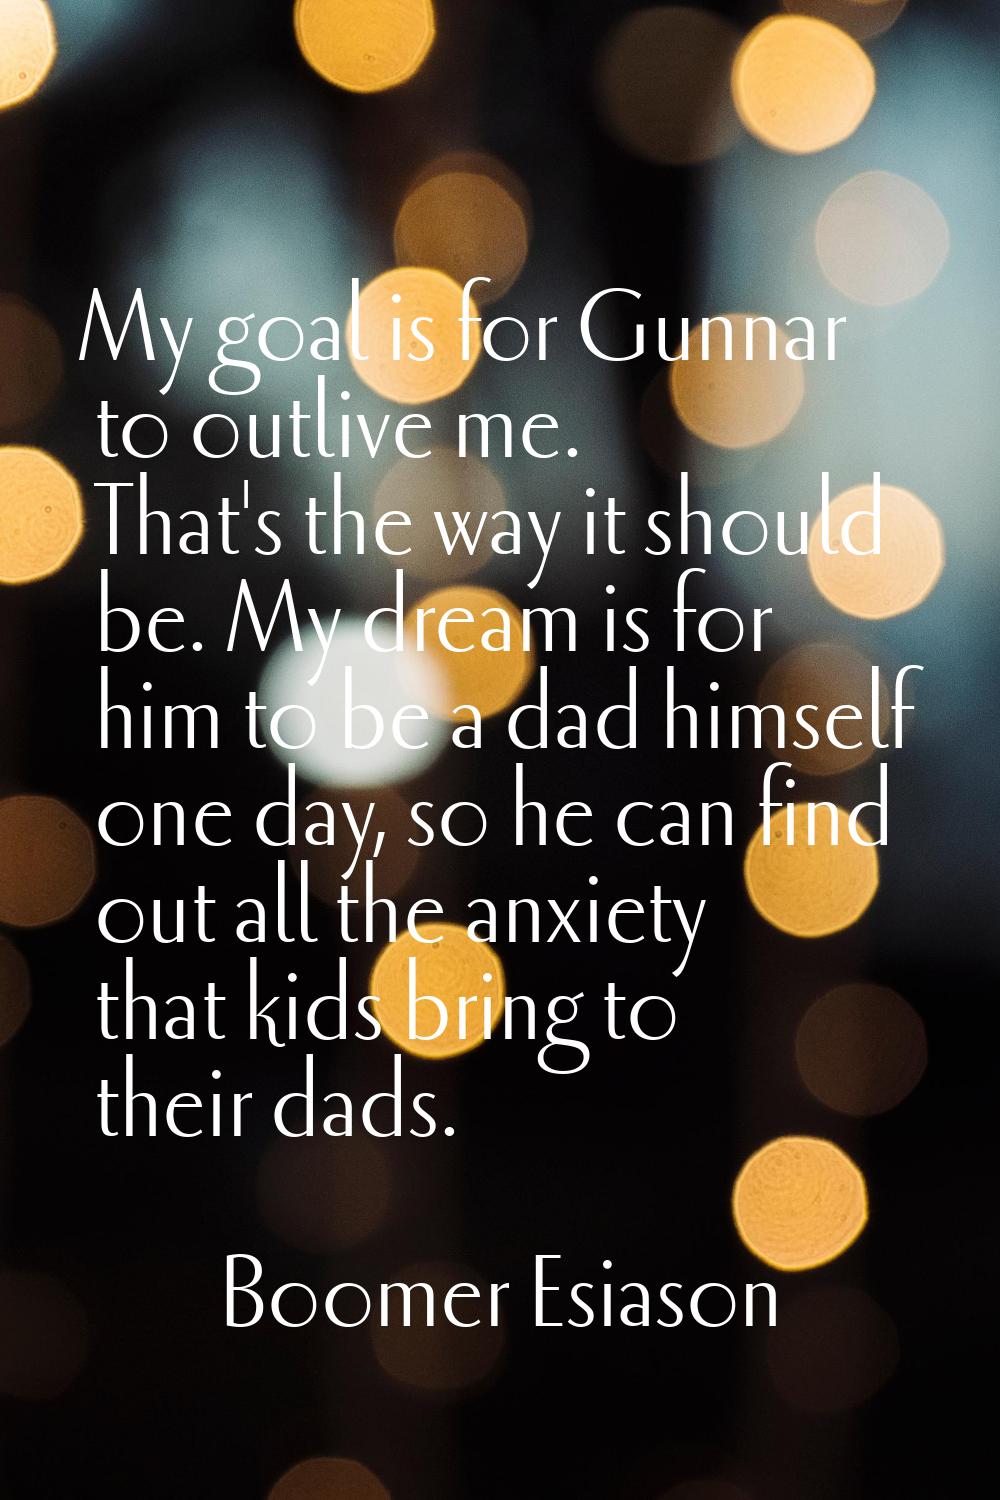 My goal is for Gunnar to outlive me. That's the way it should be. My dream is for him to be a dad h